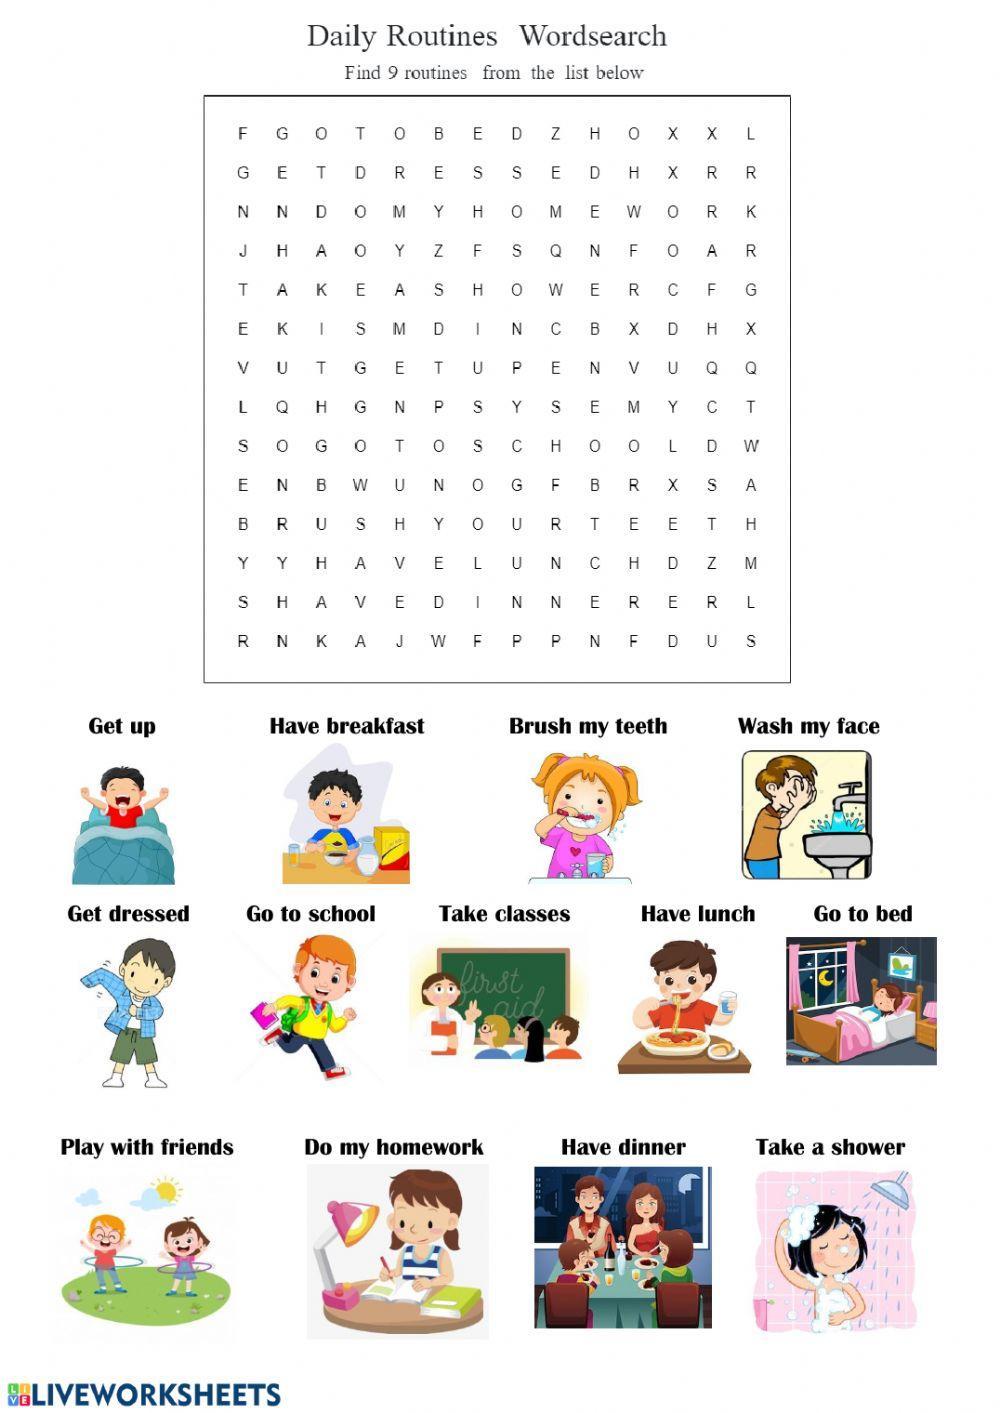 Routines exercises. Задания по теме Daily Routines. Daily Routine Wordsearch. Задания Daily Routine for Kids. Daily Routine Wordsearch for Kids.